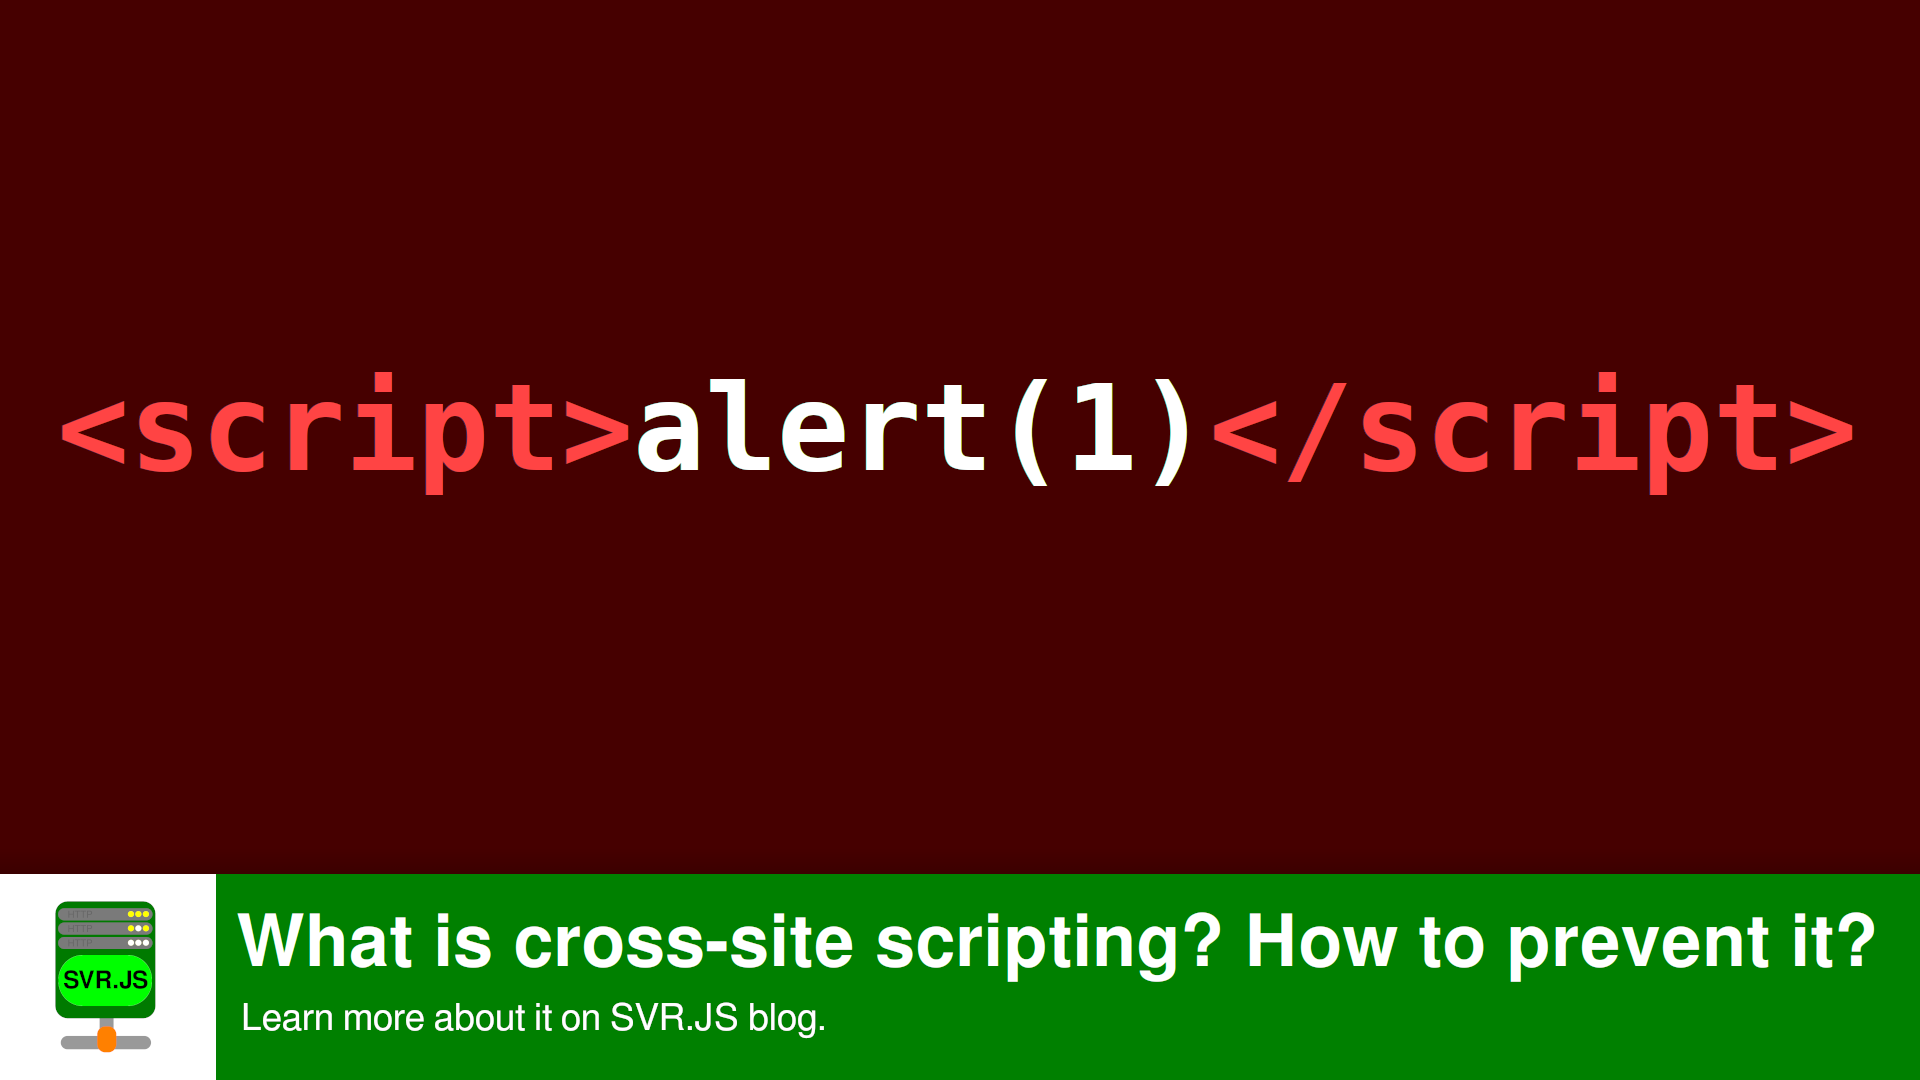 What is cross-site scripting? How to prevent it?